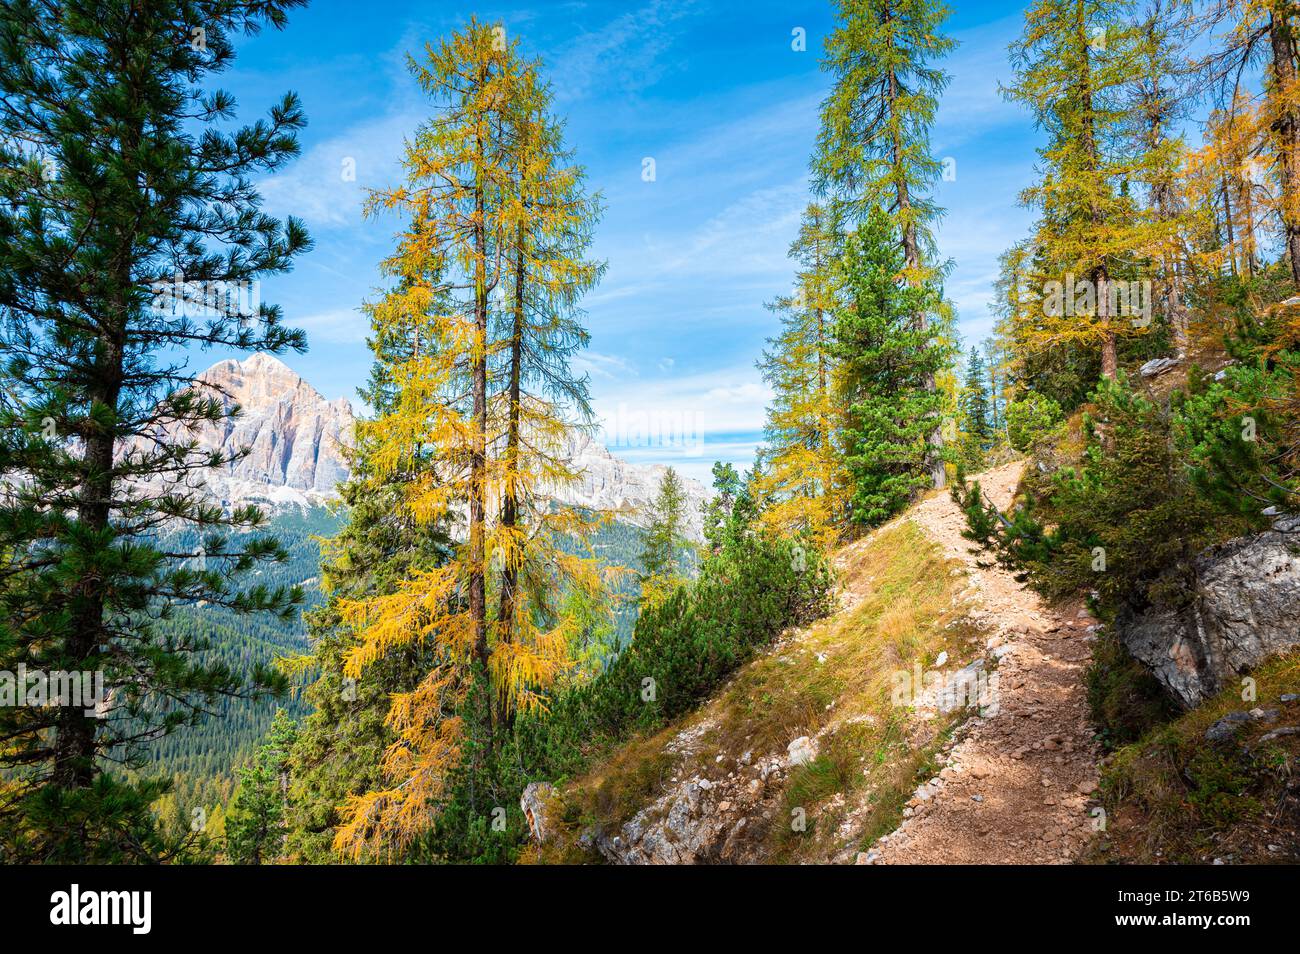 Hiking trail along a mountainside in the Dolomite Mountains Stock Photo